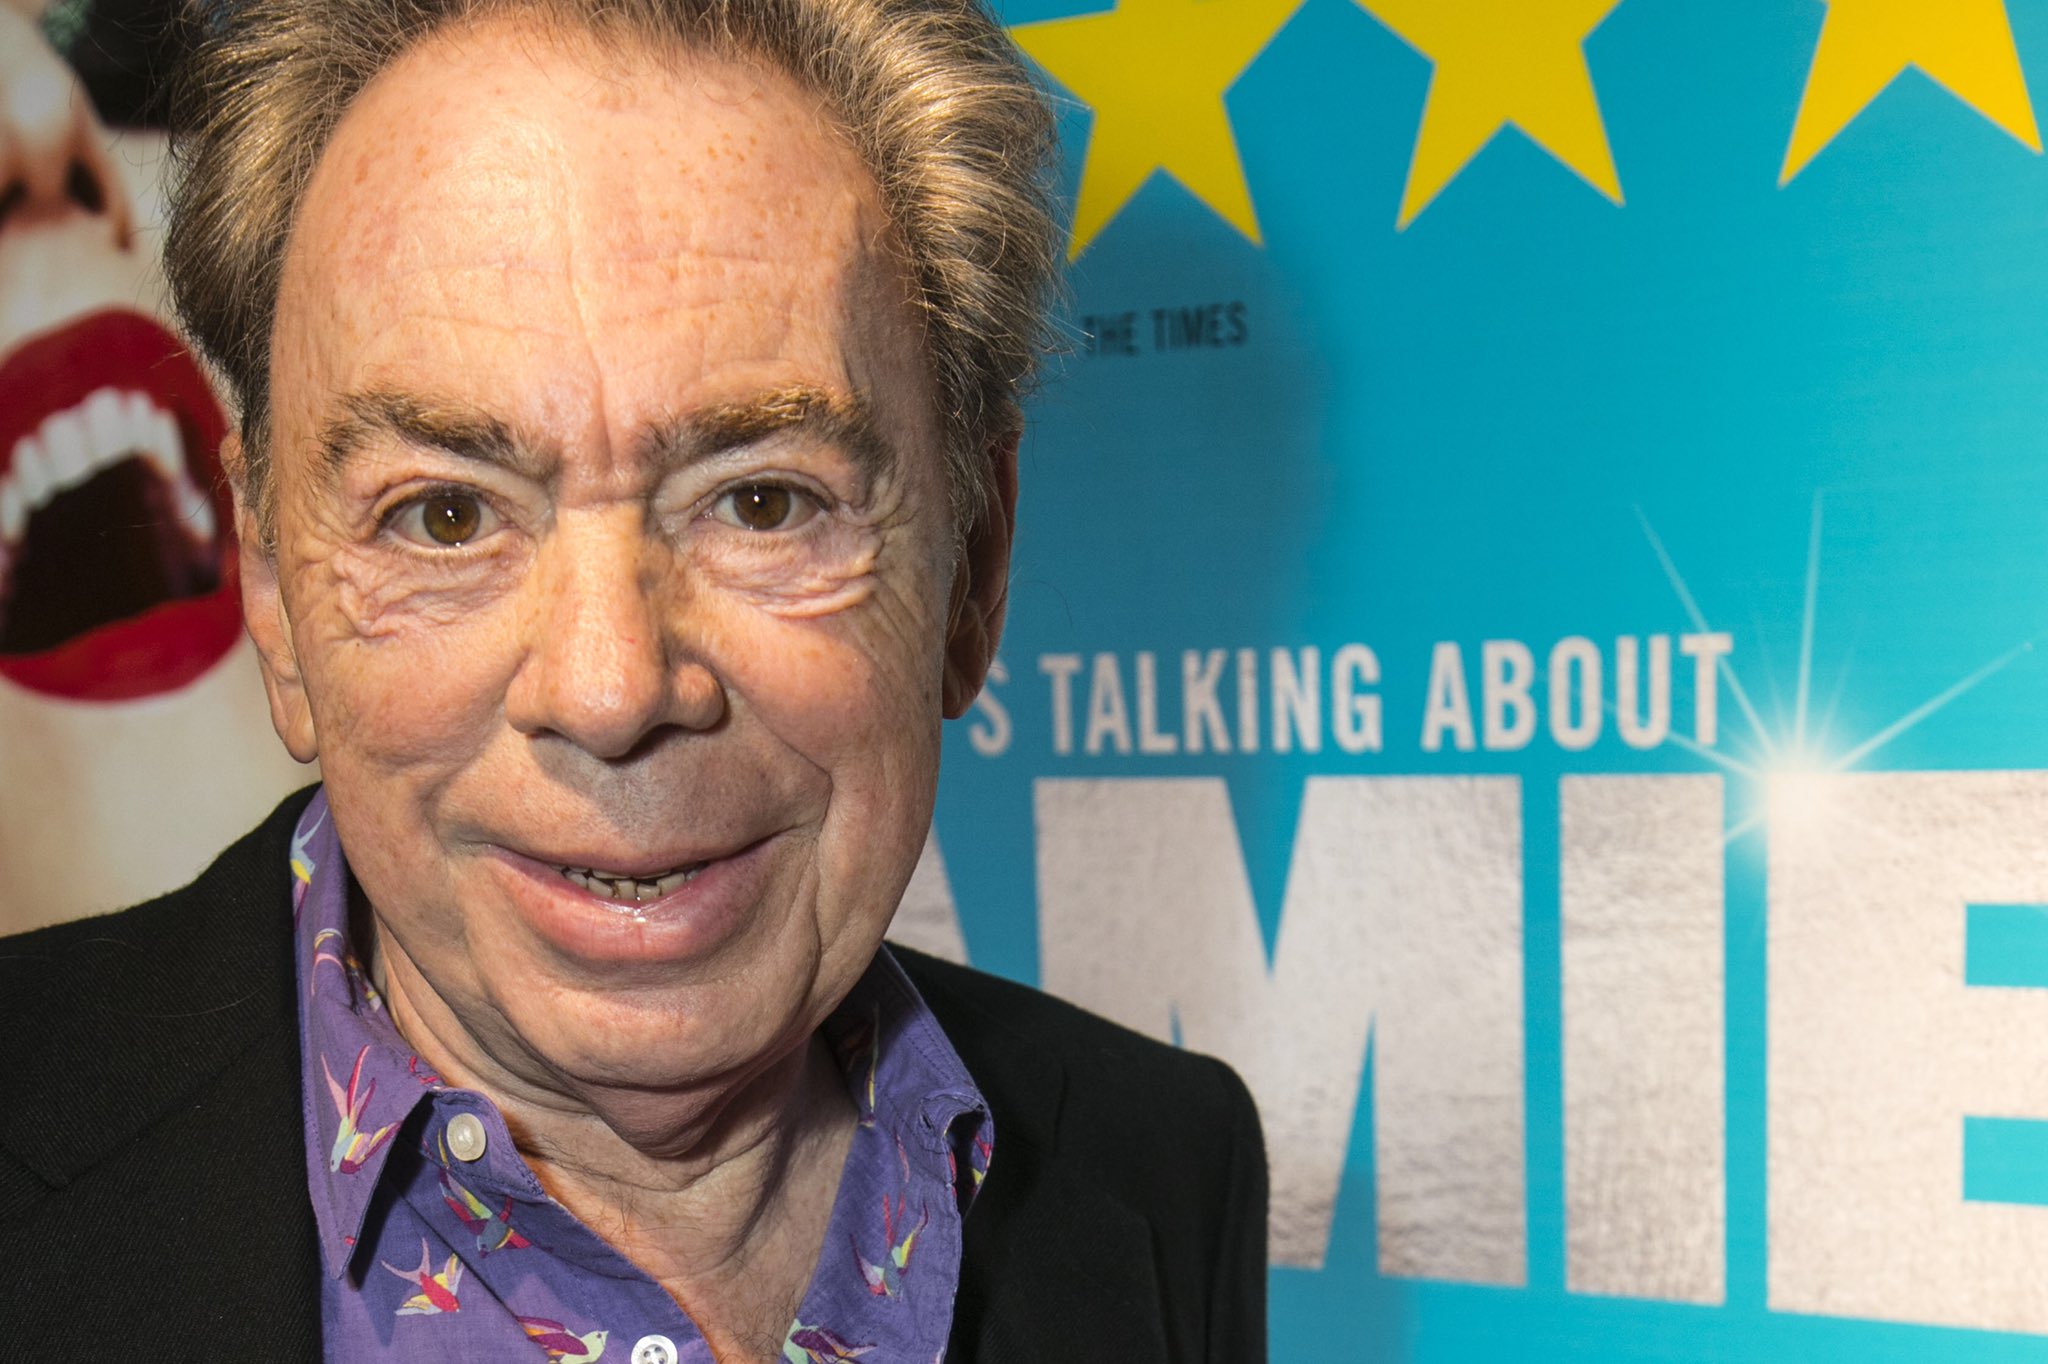 Happy 70th birthday to the legend that is Andrew Lloyd Webber. What s your favourite ALW show? 